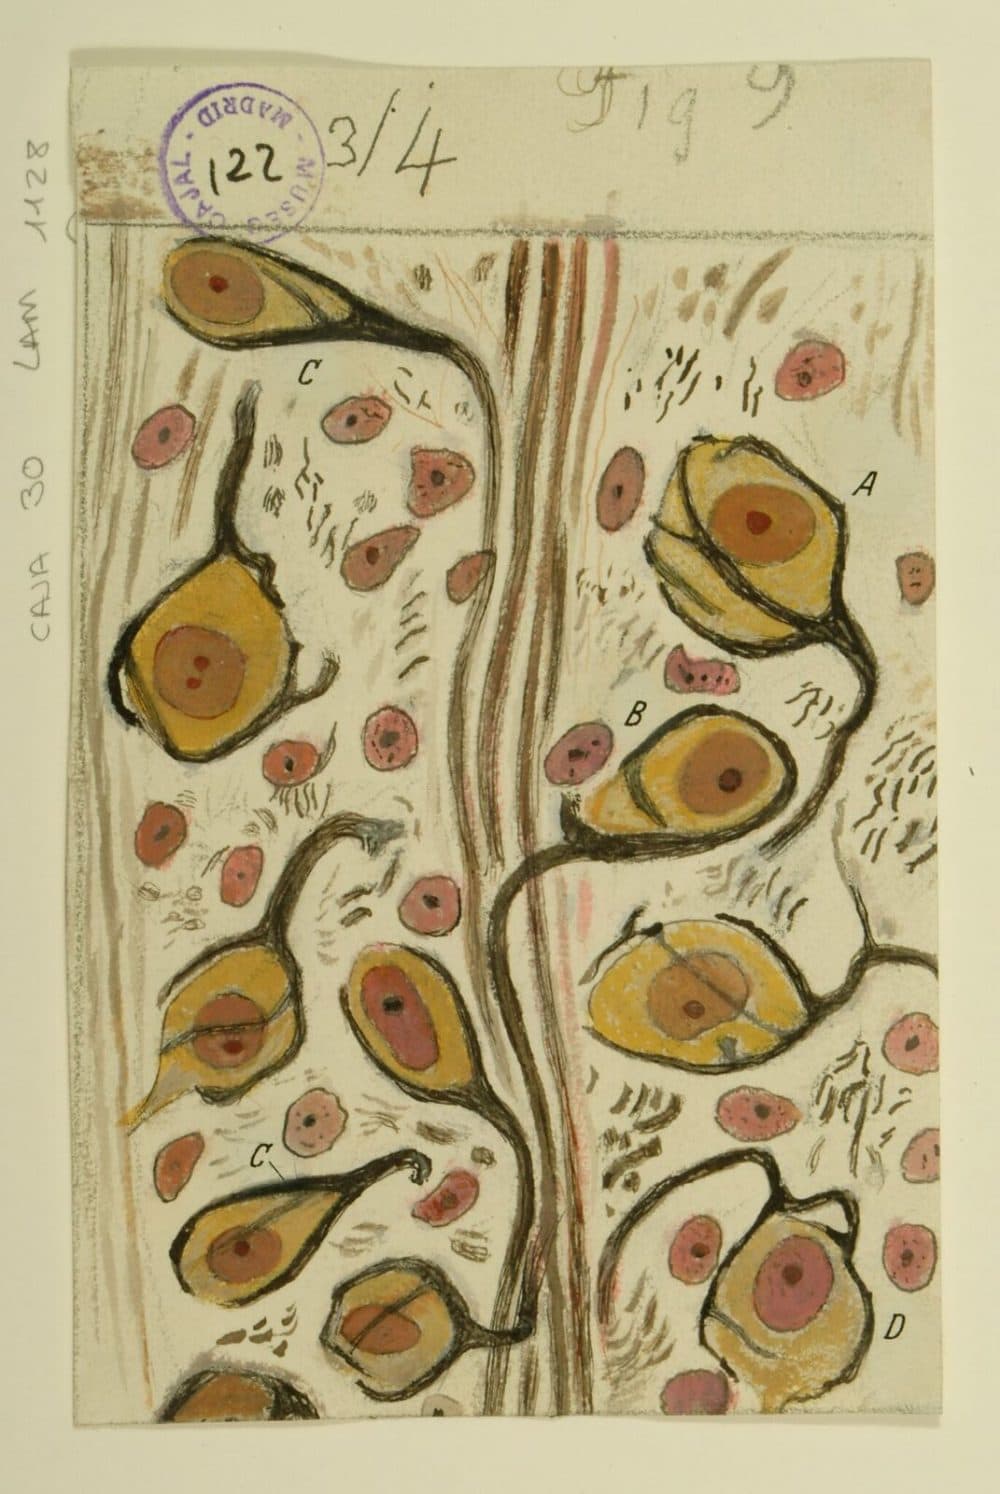 Santiago Ramón y Cajal's ink and pencil drawing of the calyces of Held in the nucleus of the trapezoid body, created in 1934. (Courtesy of Instituto Cajal)